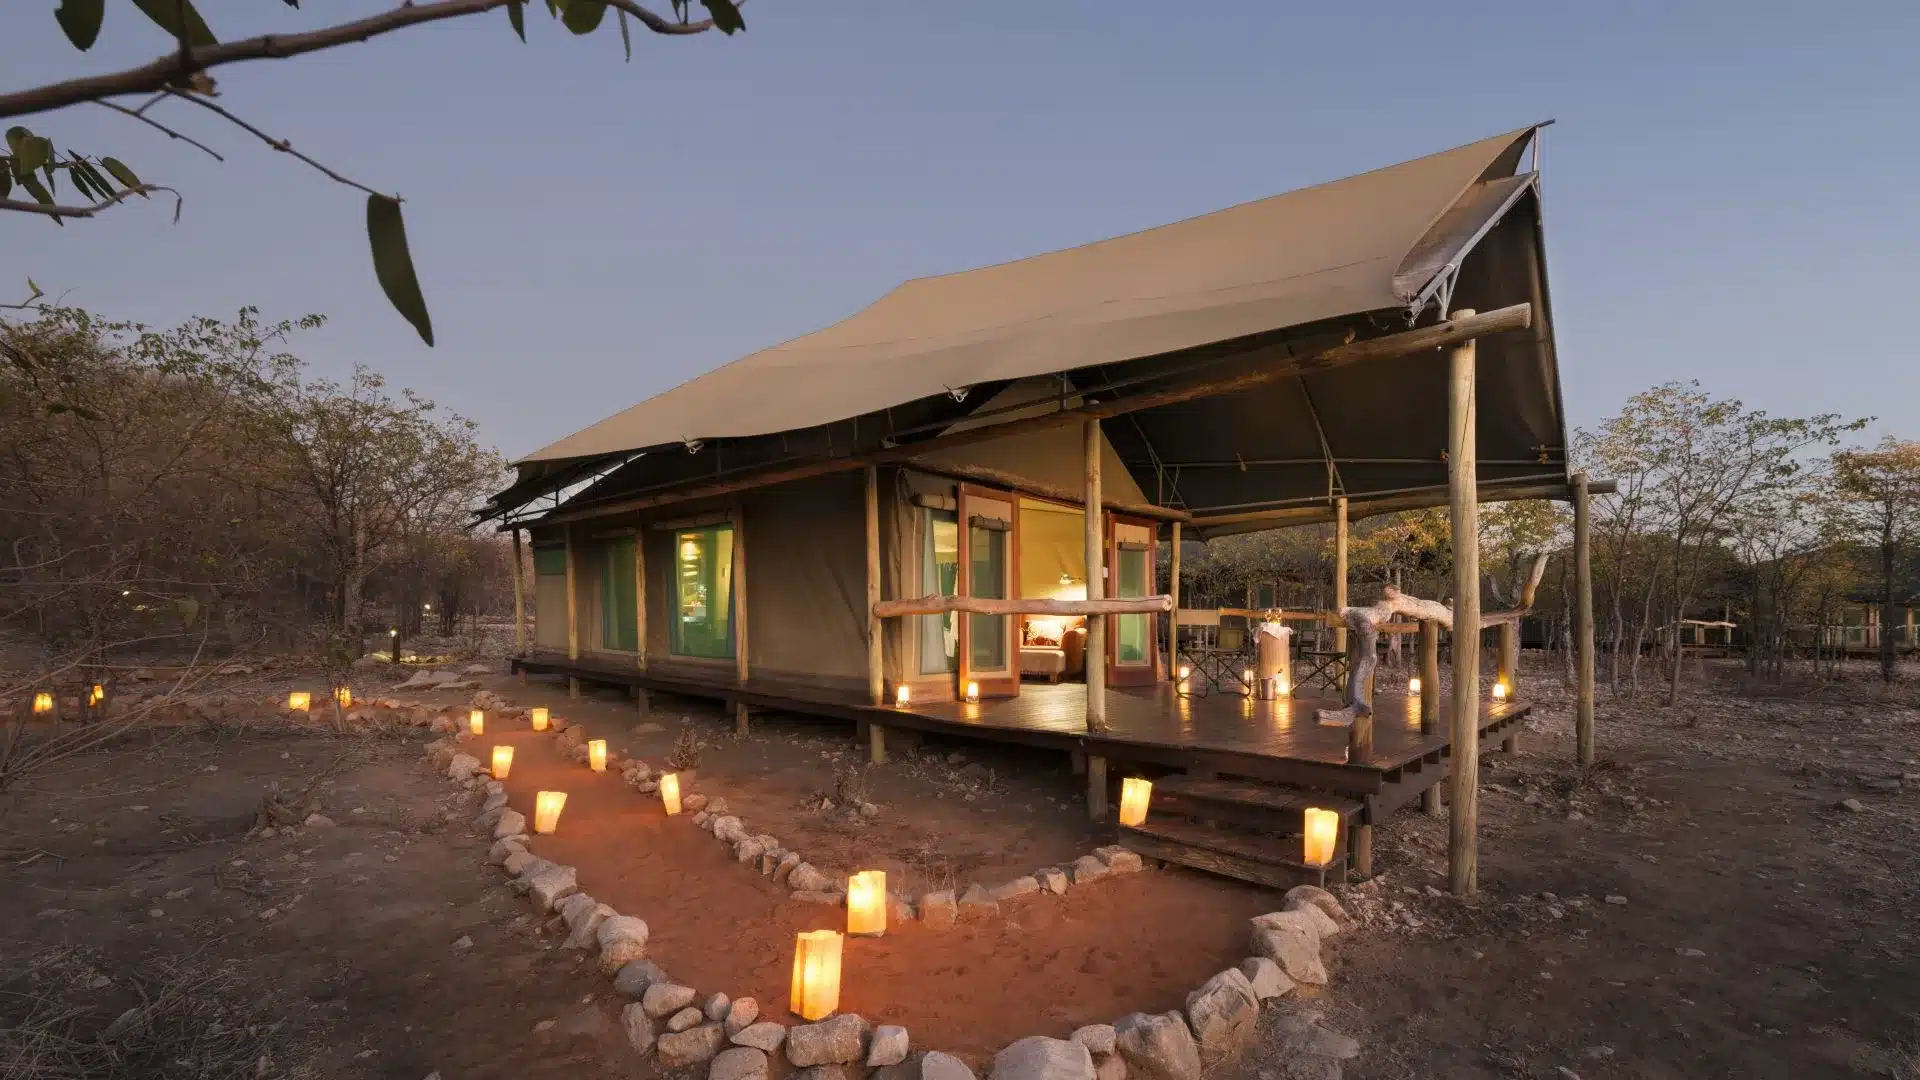 38 Ongava Tented Camp